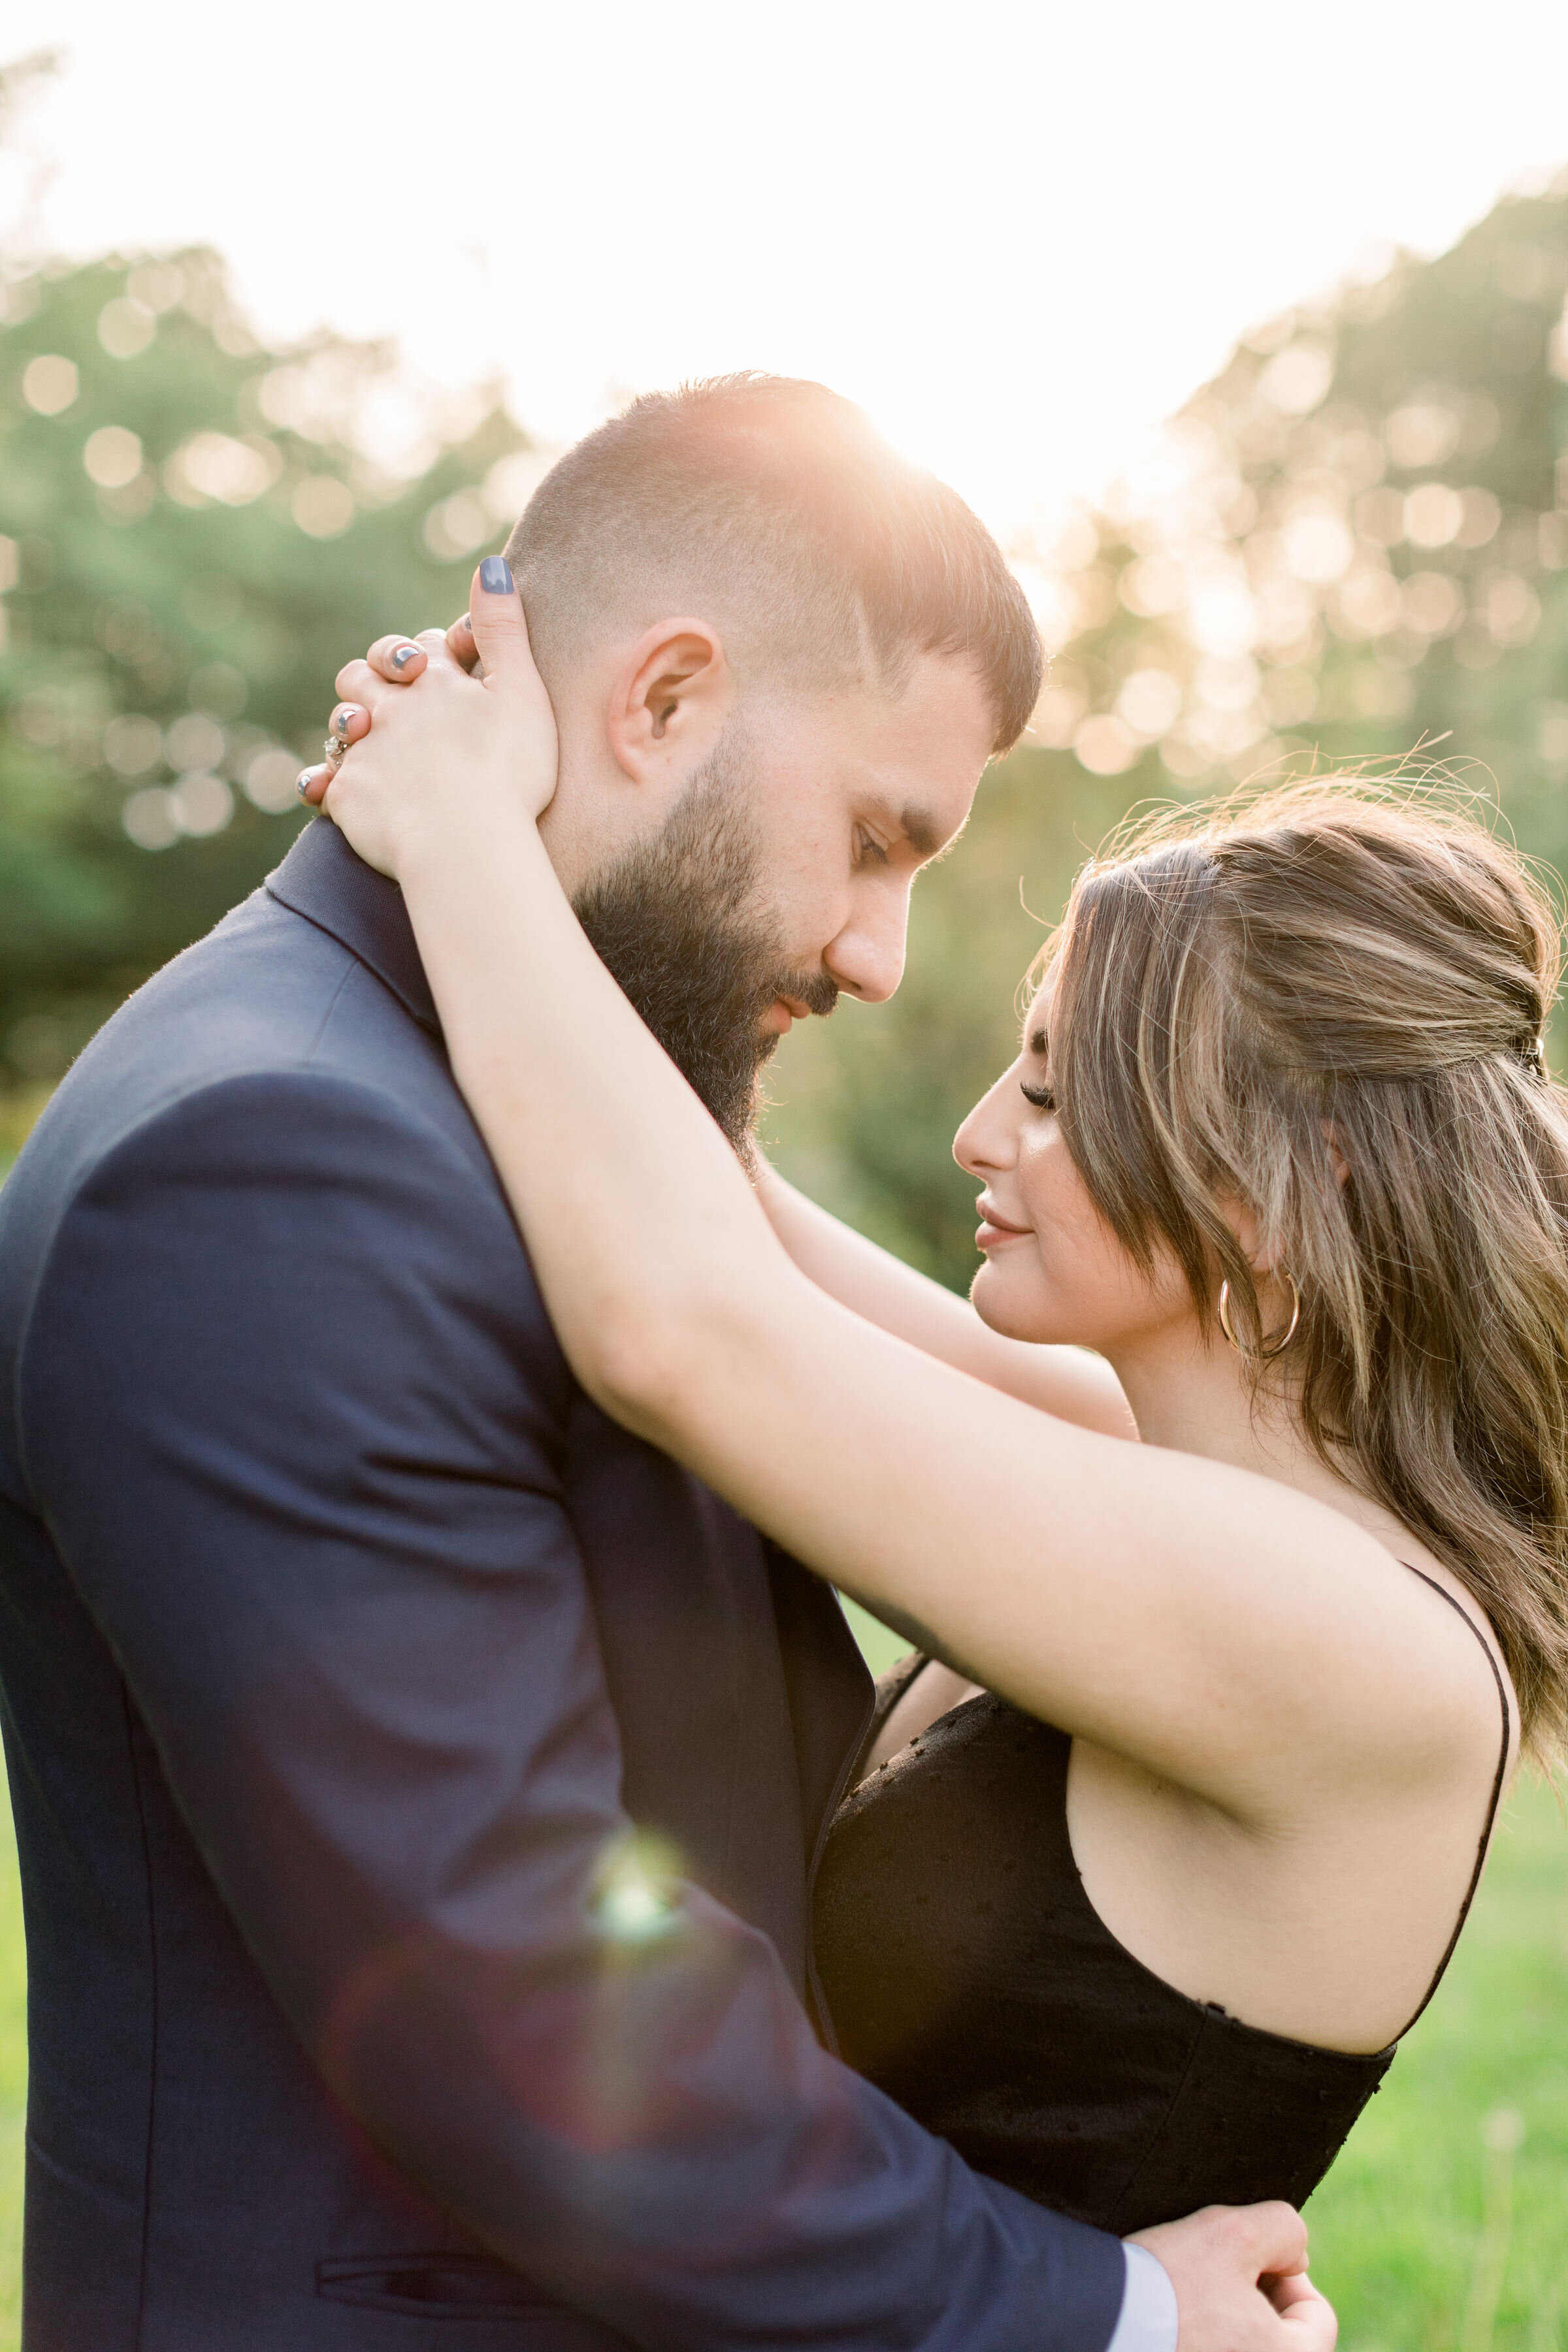  During this park engagement session in Ottawa, Canada, Chelsea Mason photography captures this soon-to-be groom embracing his fiancé tenderly while gazing down at her.  groom embracing fiancé woman's eyes clothes tender romantic couples poses Ottawa